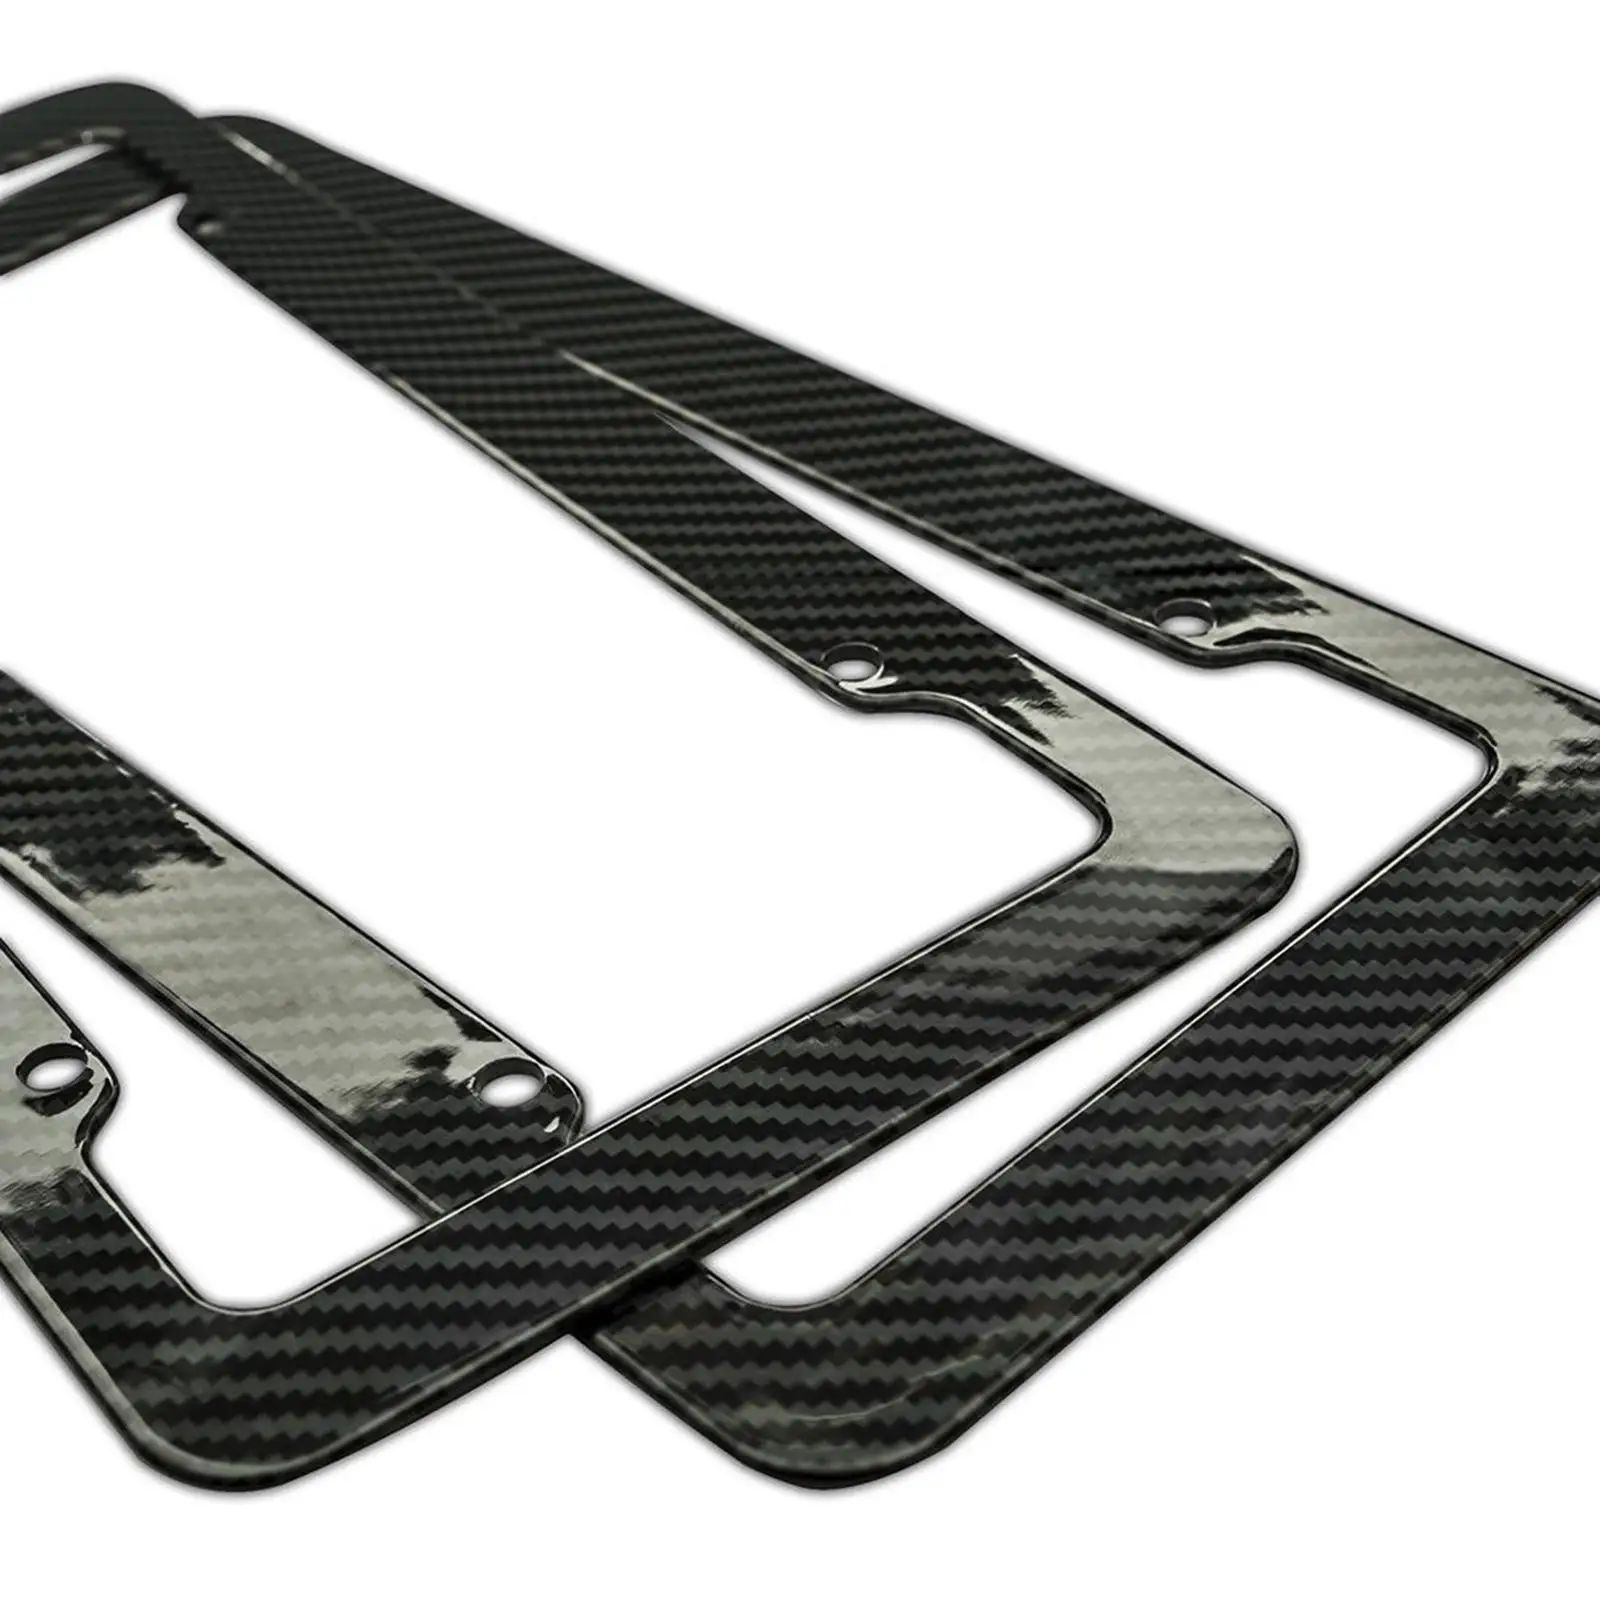 2 Carbon Fiber Style License Plate Frames Front Rear with Screws Holder for Car Truck US Accessories